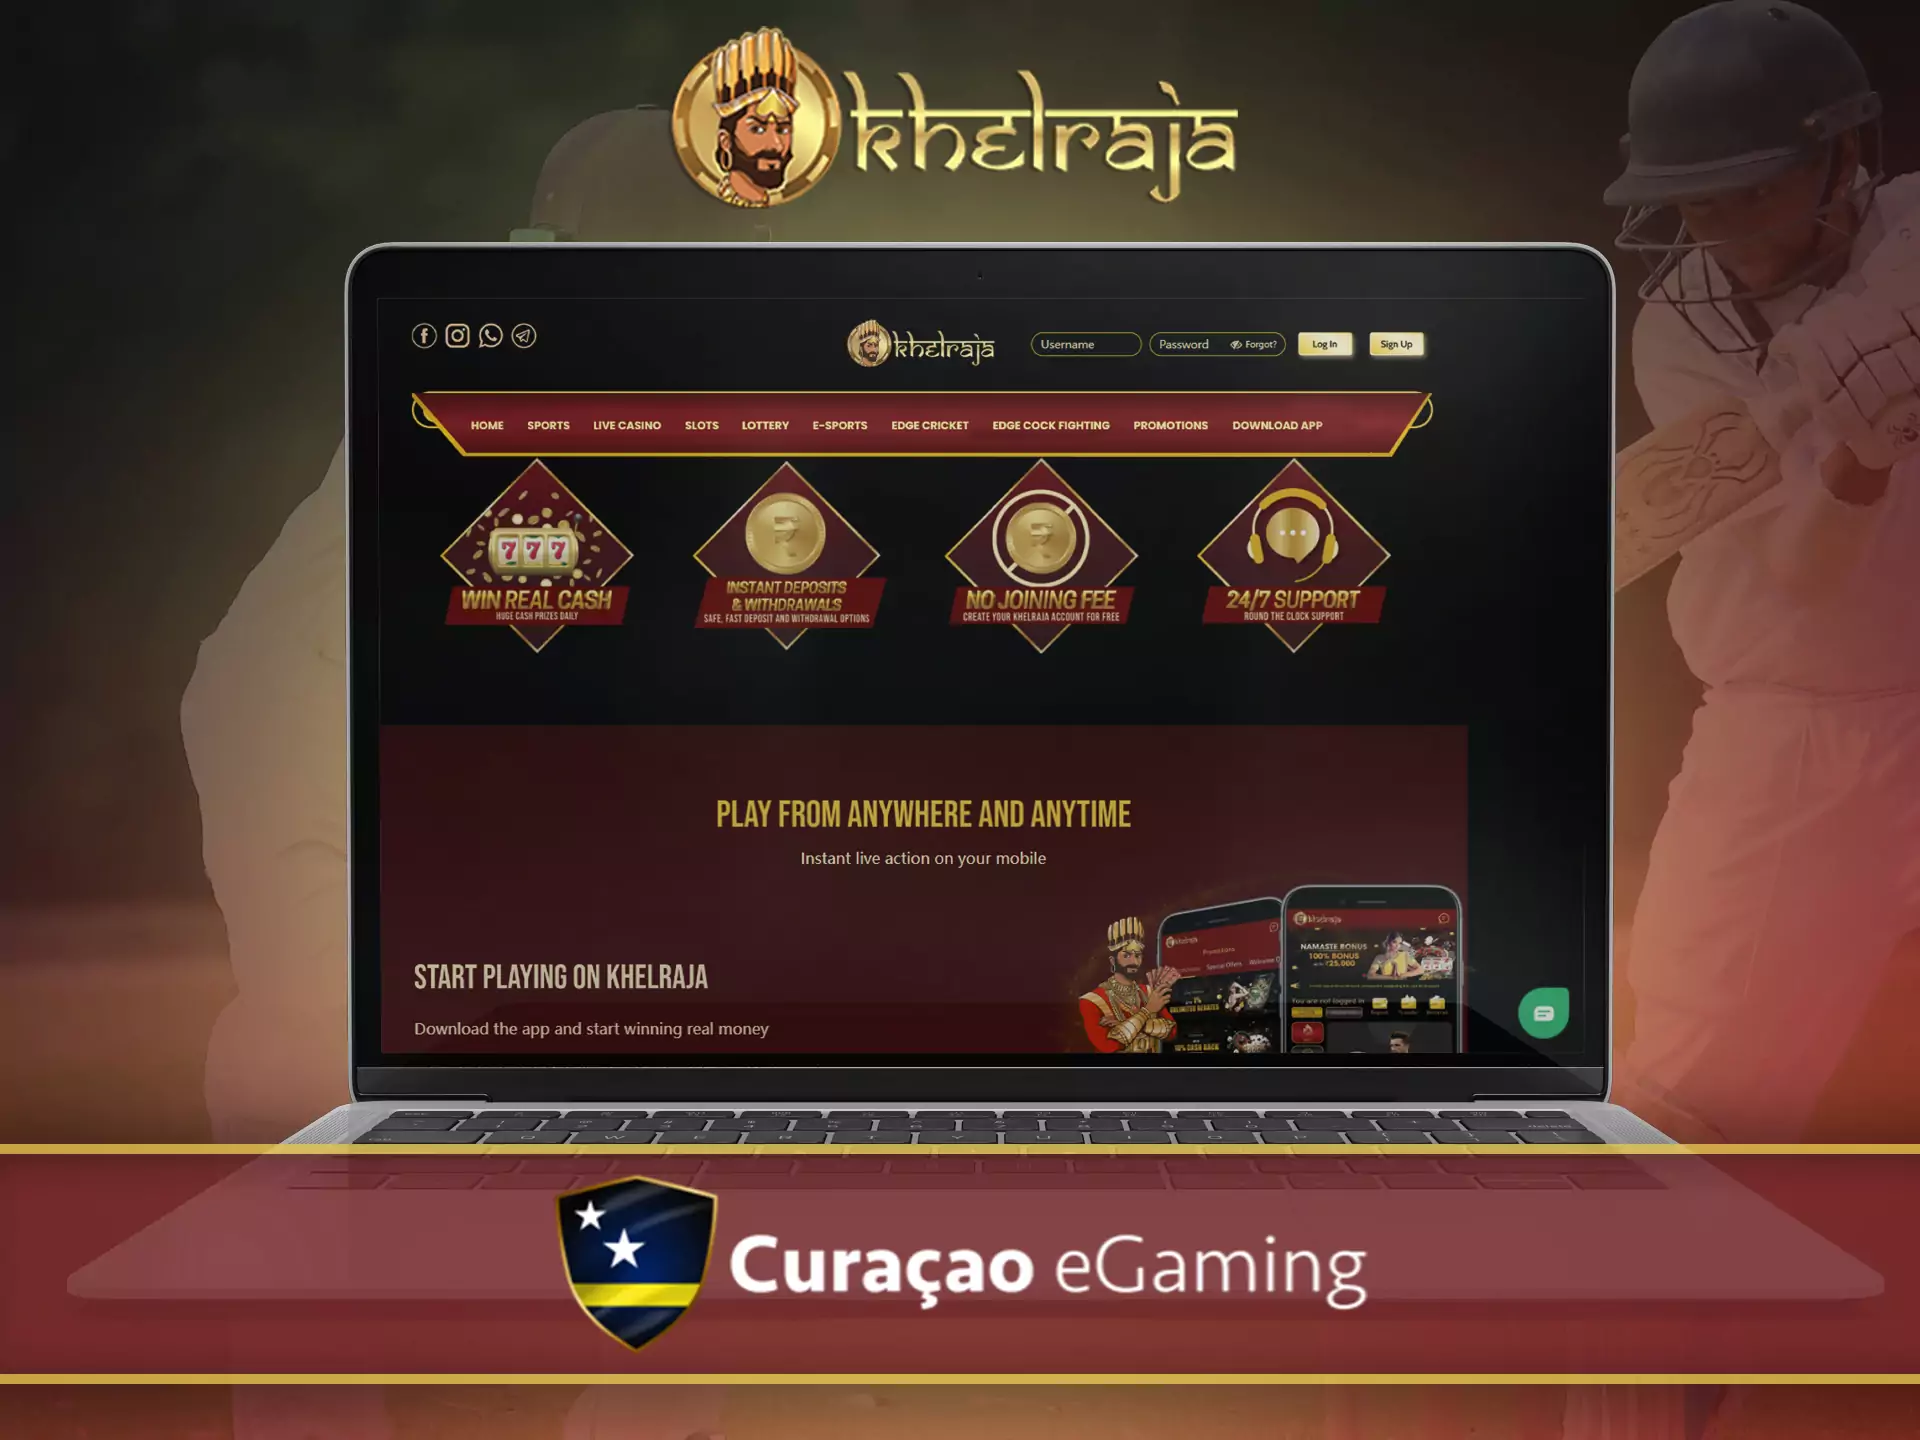 Khelraja works legally thanking the Curacao Egaming license.